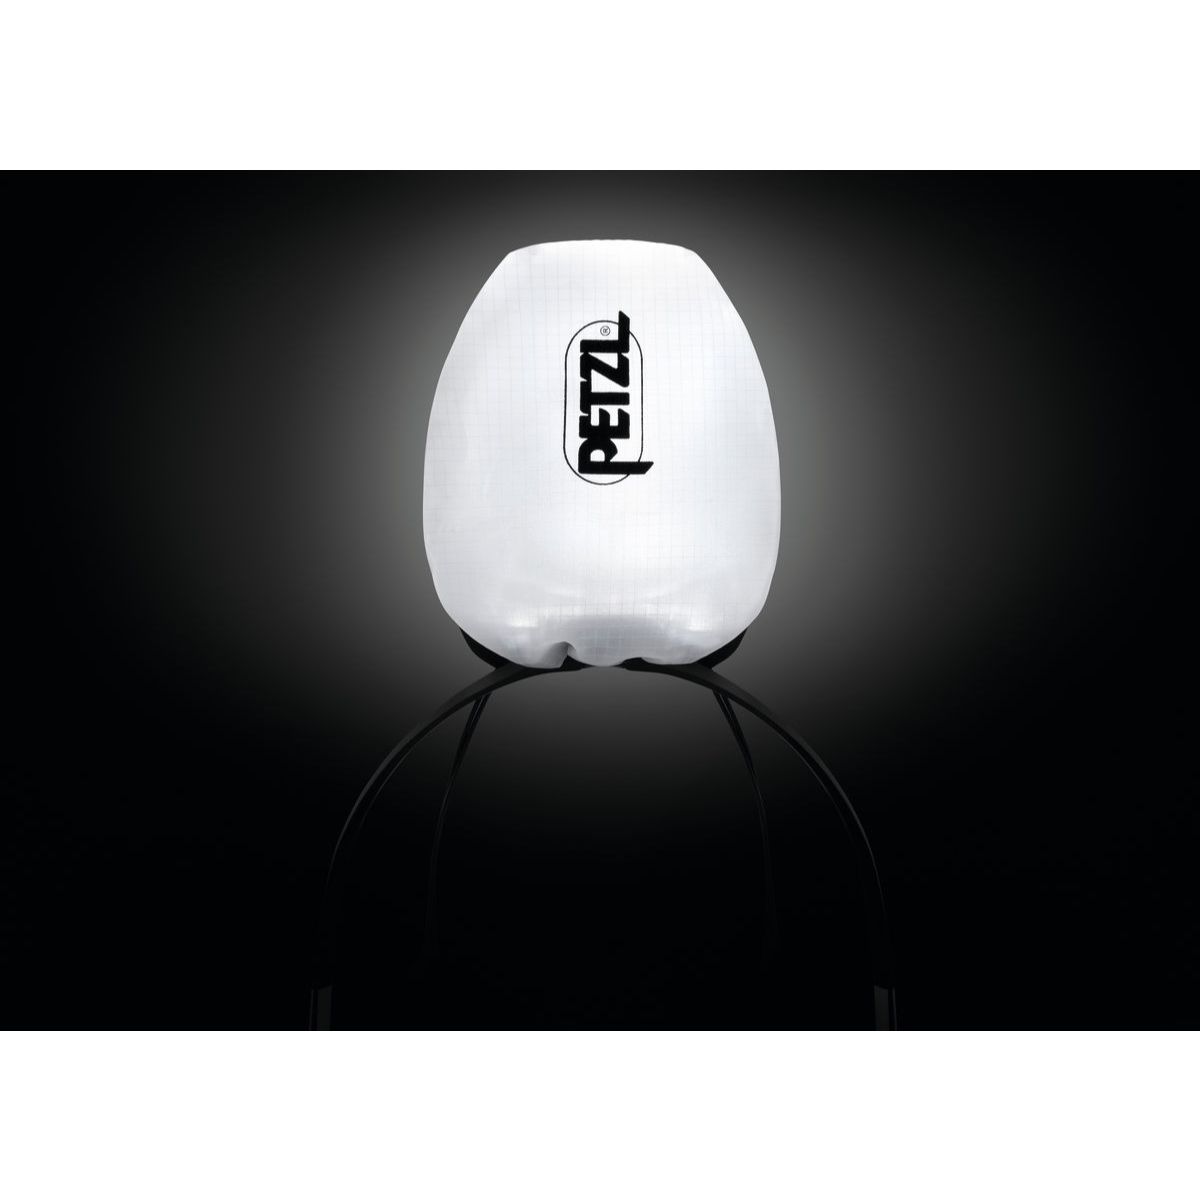 Petzl IKO in white and black showing case that doubles as lamp